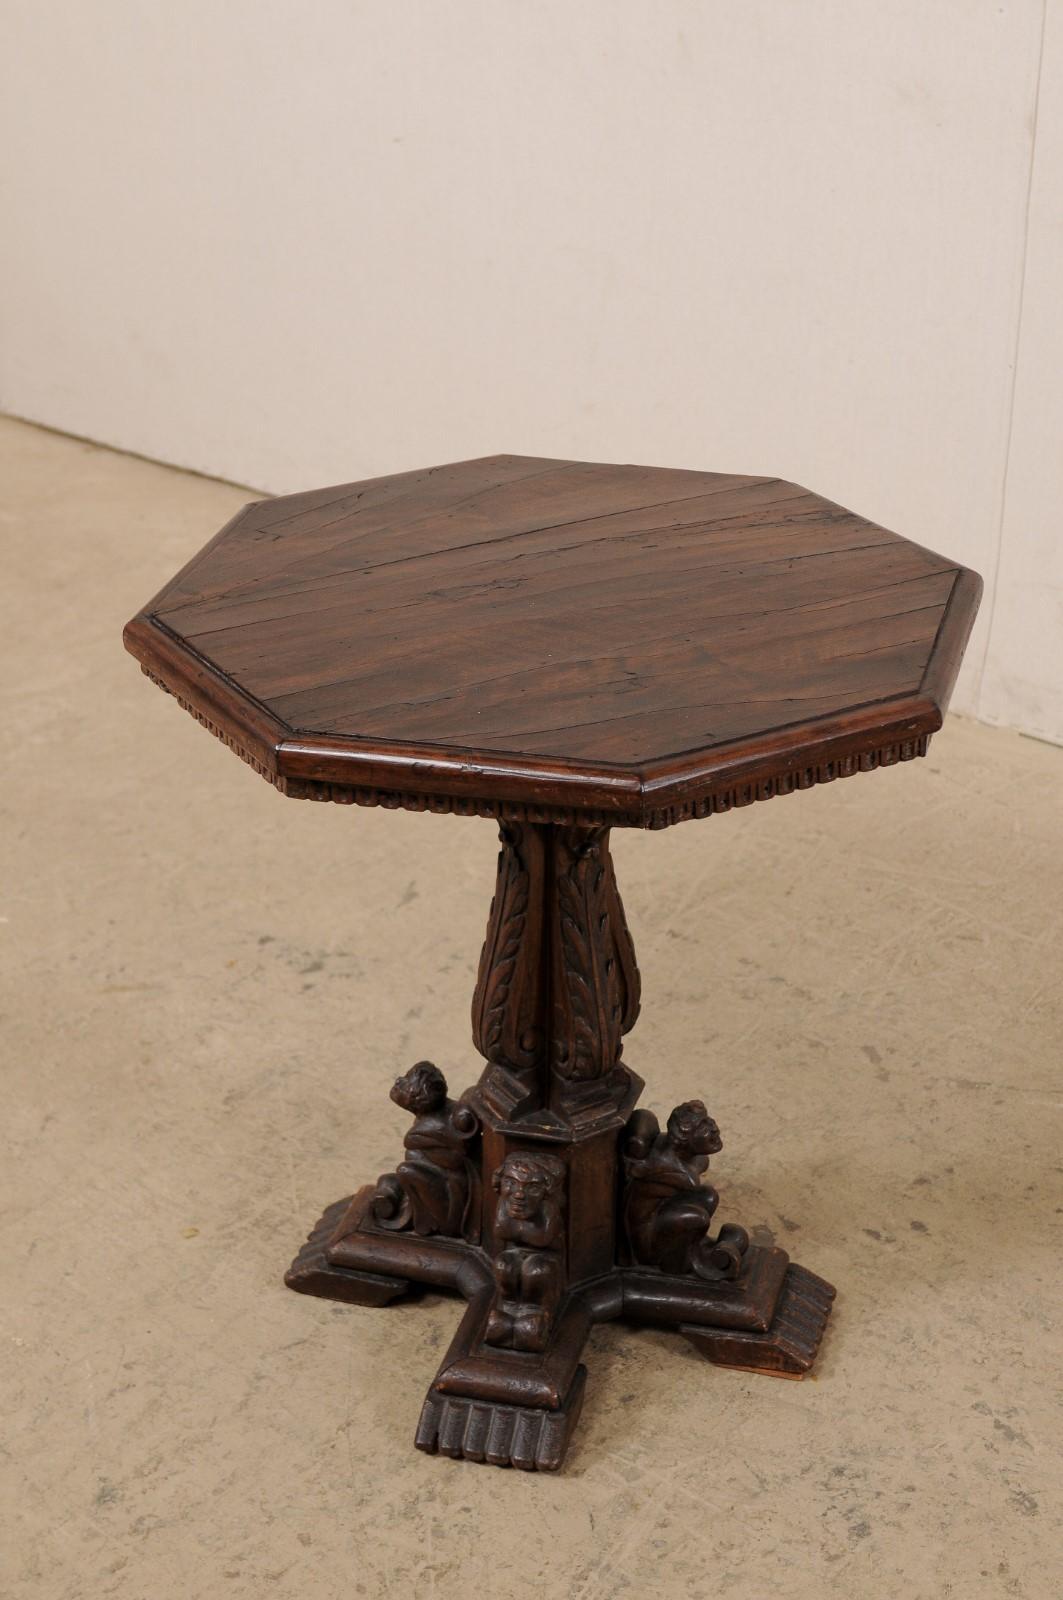 19th Century Italian Small Pedestal Table w/Carved Figures & Octagon Top, Early 19th C